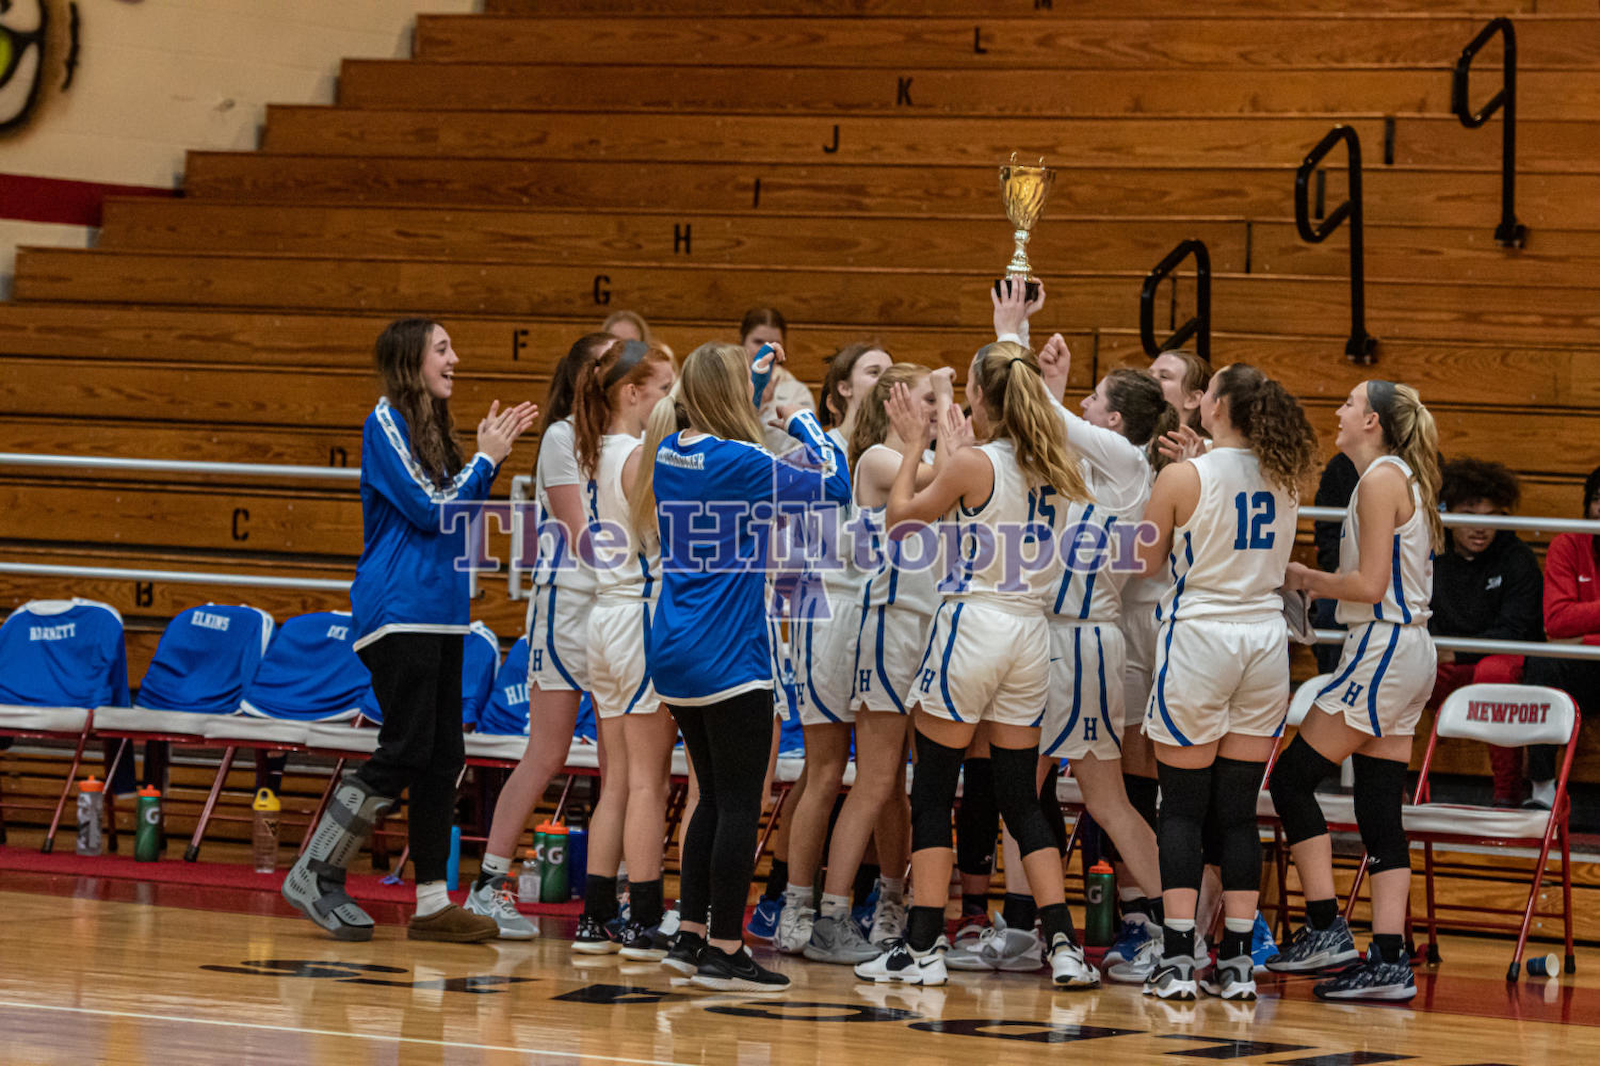 The-Varsity-Girls-Basketball-team-huddles-with-there-trophy-after-winning-the-championship-game-vs.-Augusta-at-the-Donna-Murphy-Showcase.-jenna-richey-2.png